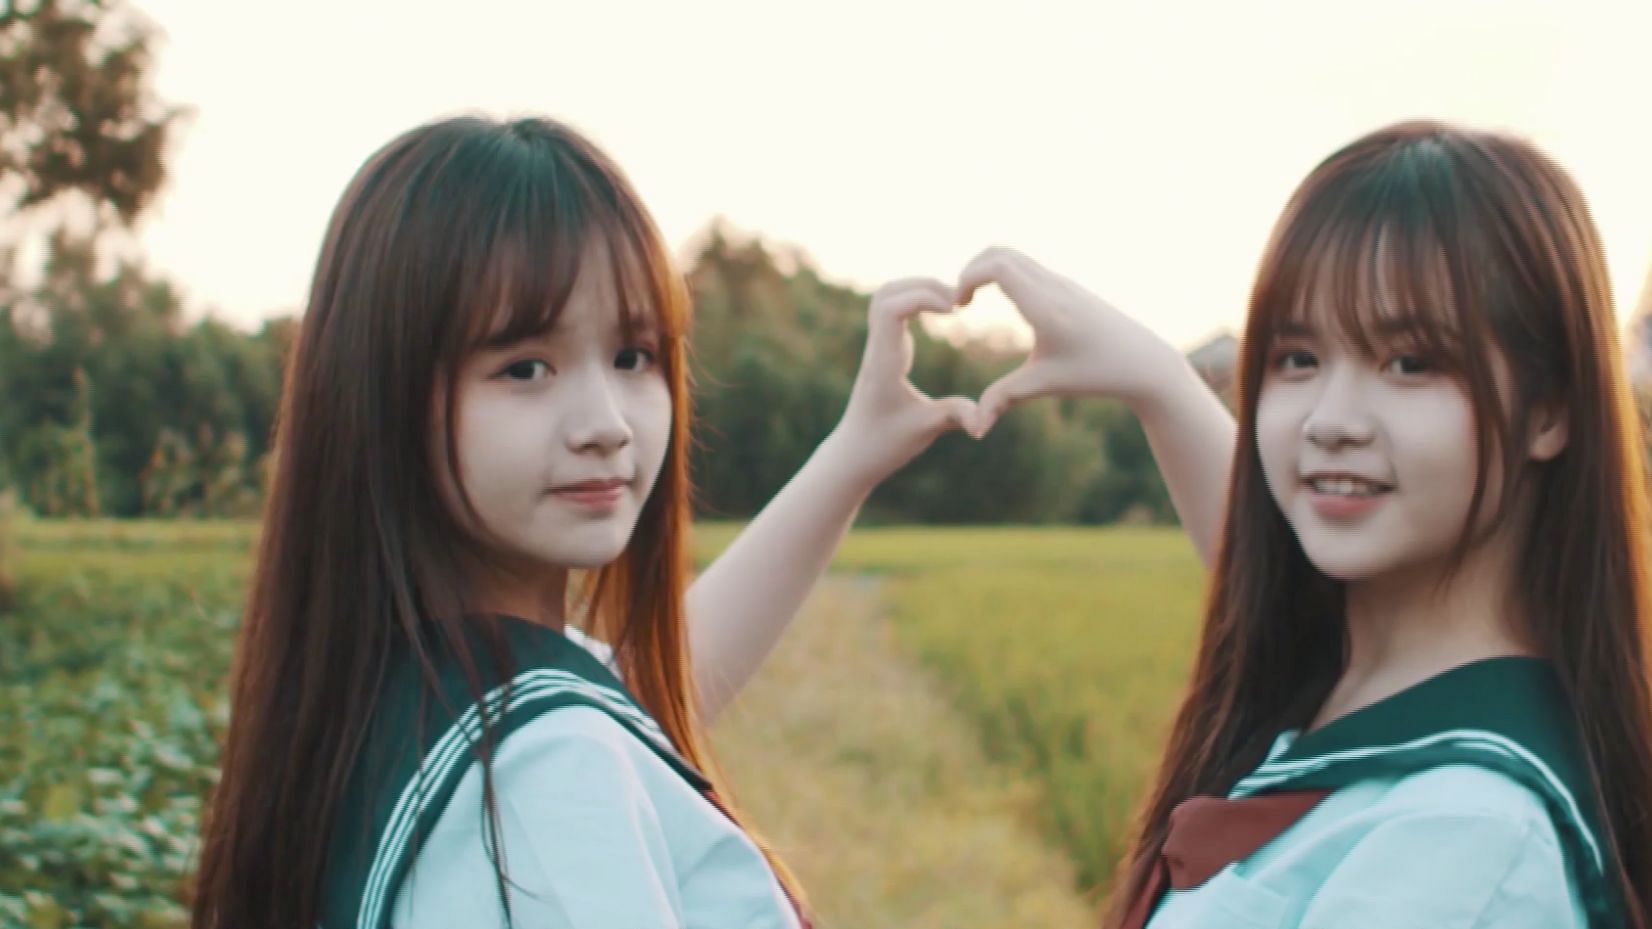 Twins Sun Weixiao &amp; Sun Weimiao are 19 years old and immensely popular on the social media app TikTok. 